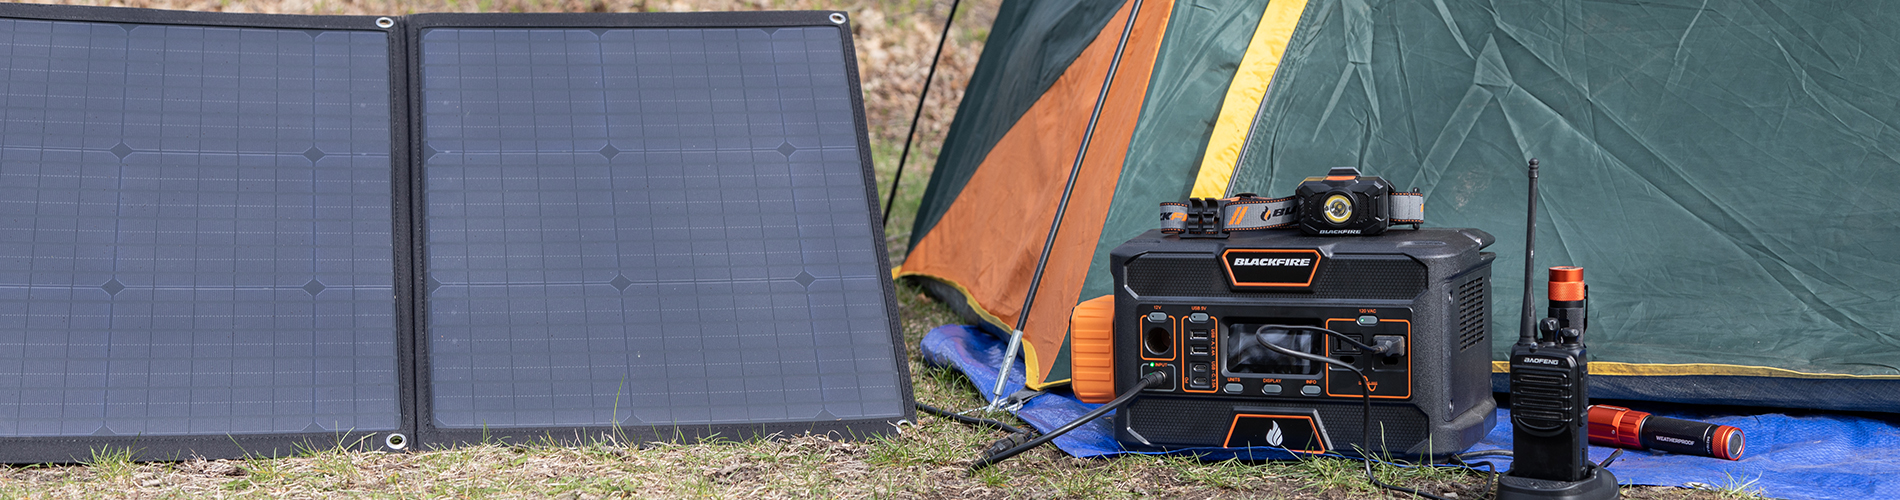 RYTONPOWER BR5000 Portable Power Station, 5000W 5120Wh - The best Portable Power  station for home appliances and solar system